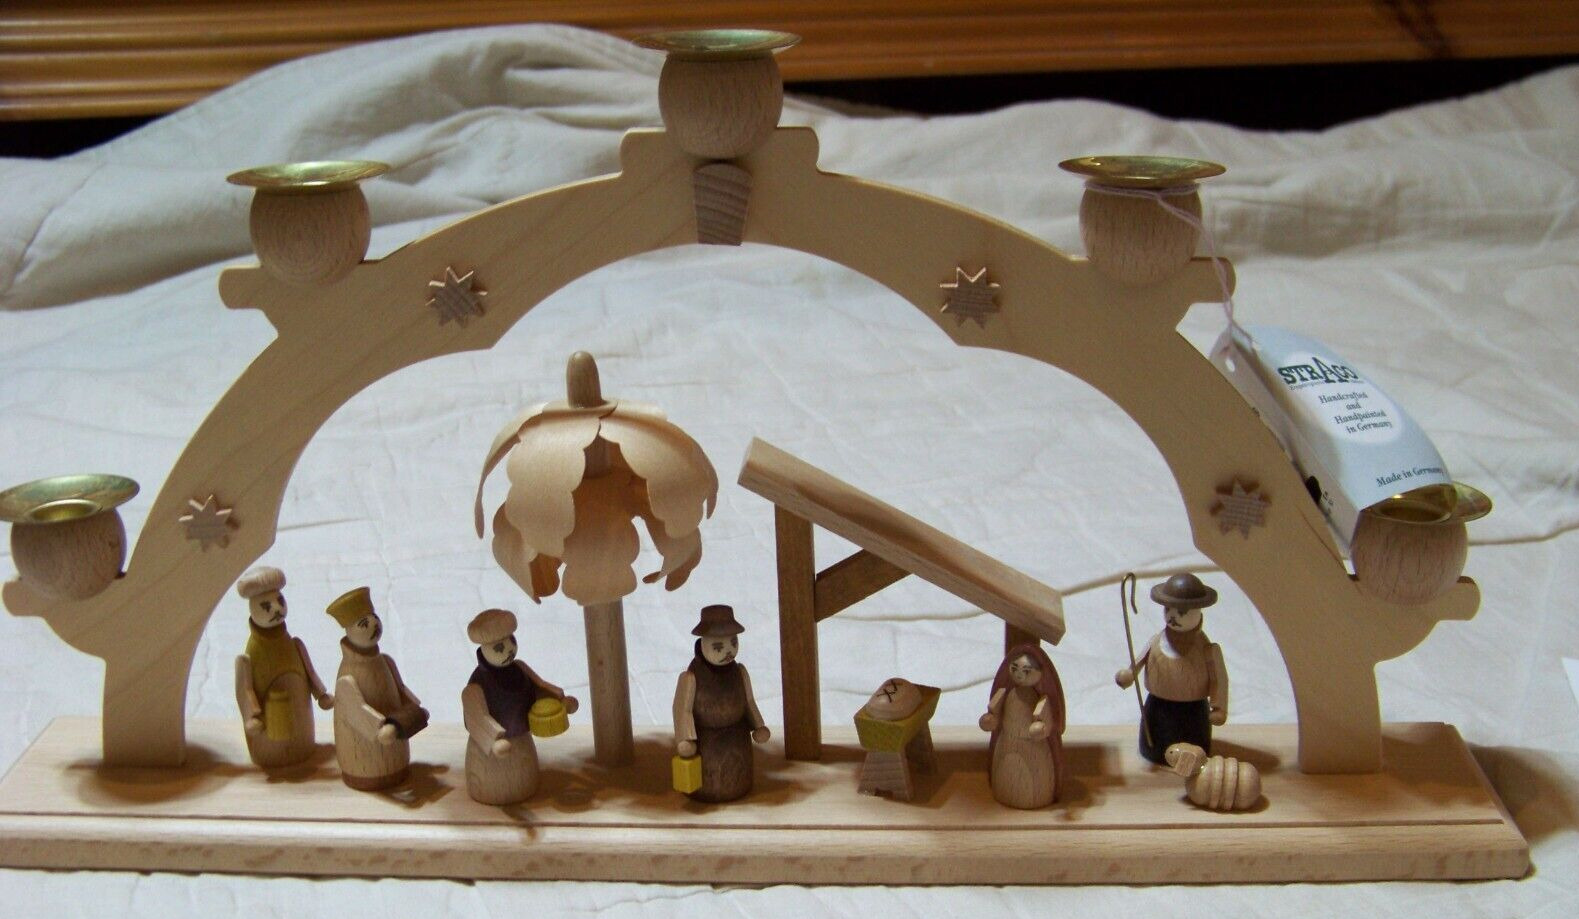 Straco Land Nativity Candle Arch #8636476 -  New in Box - Made in Germany